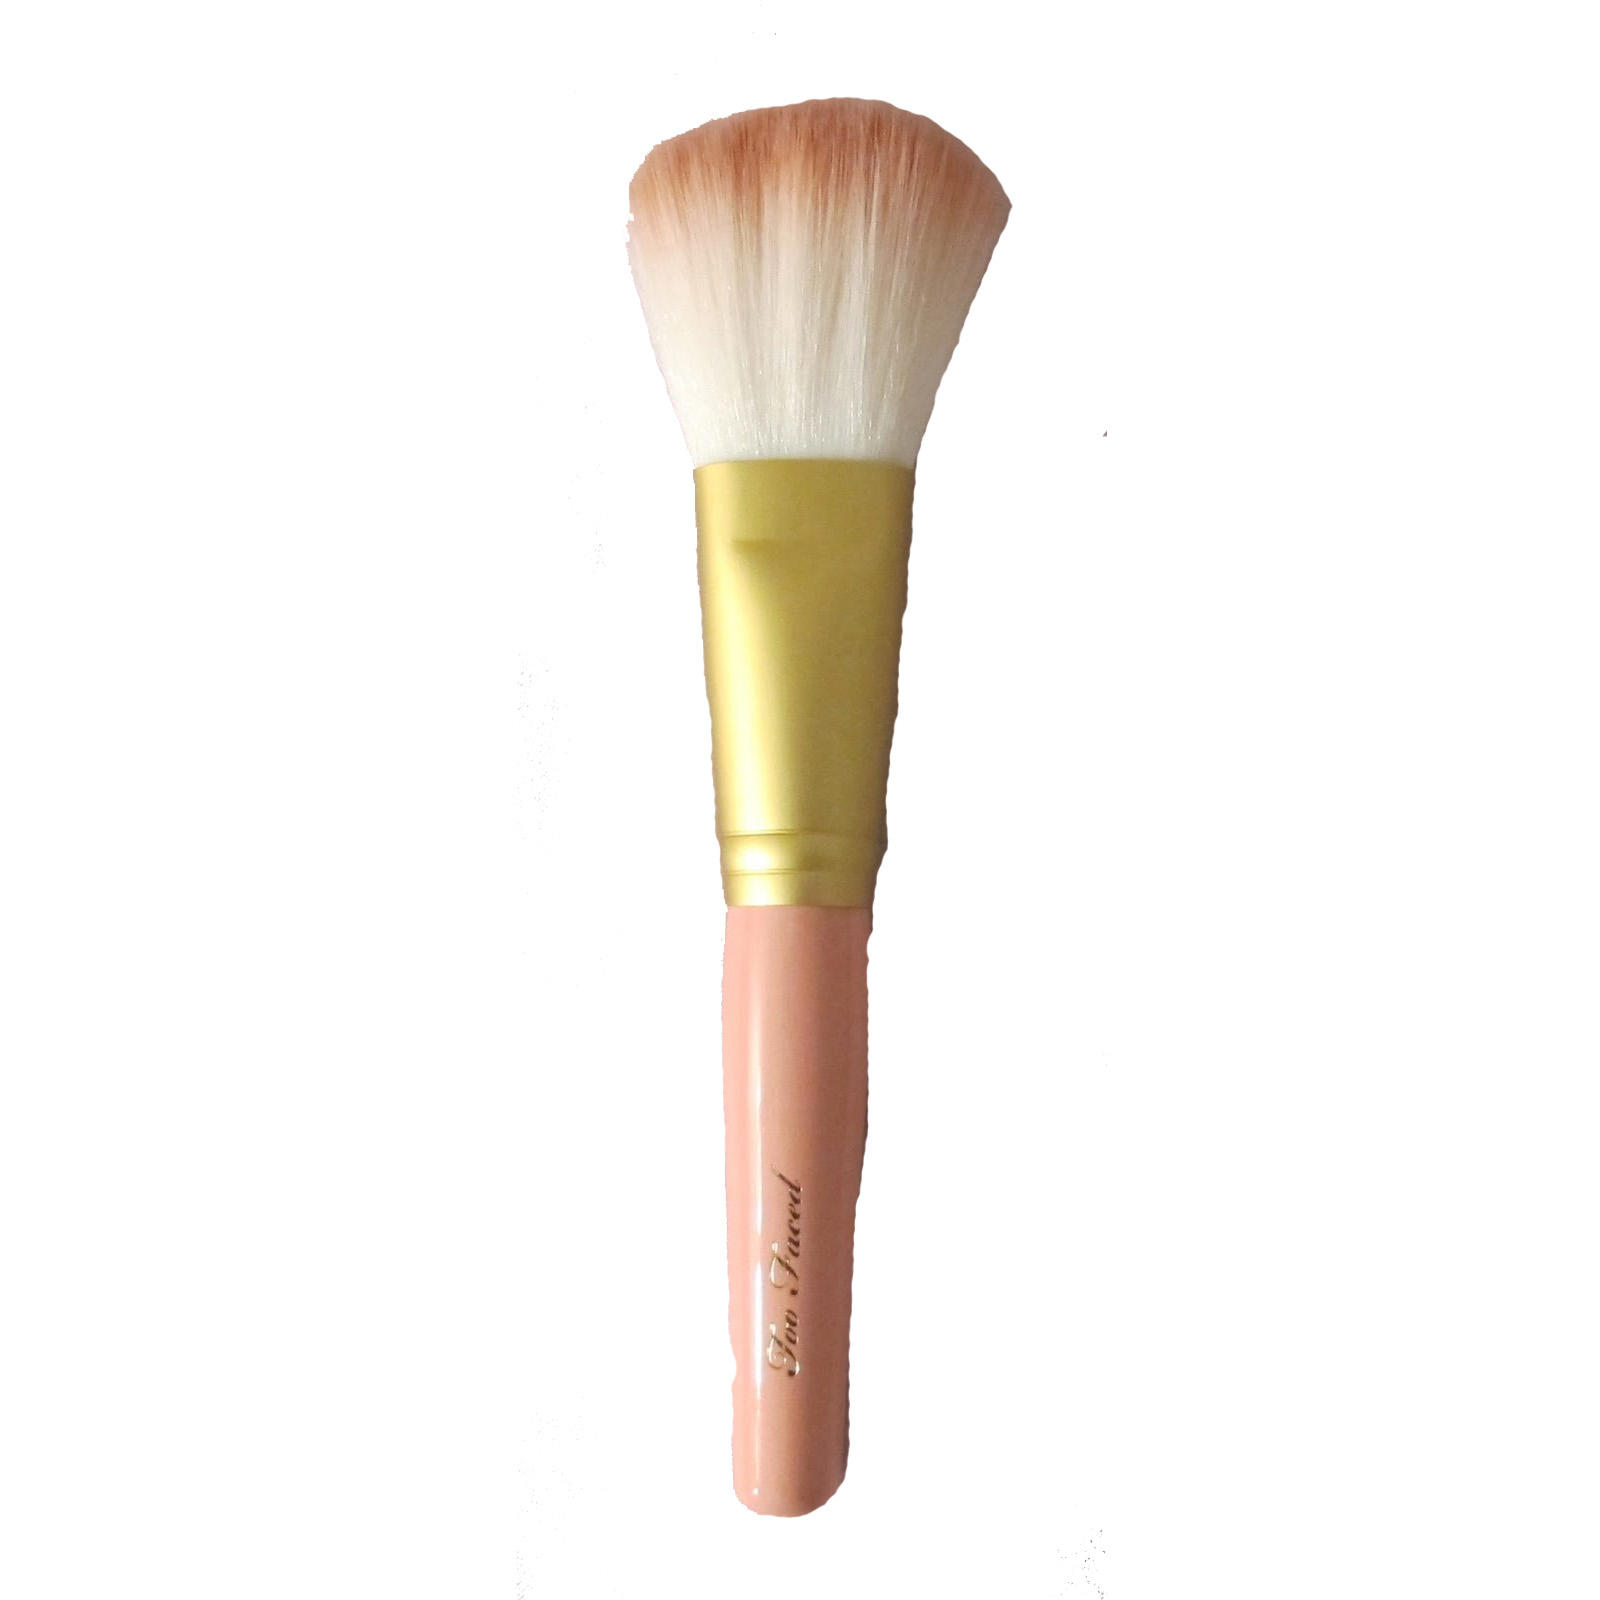 Too Faced Petite Pouf Face Brush